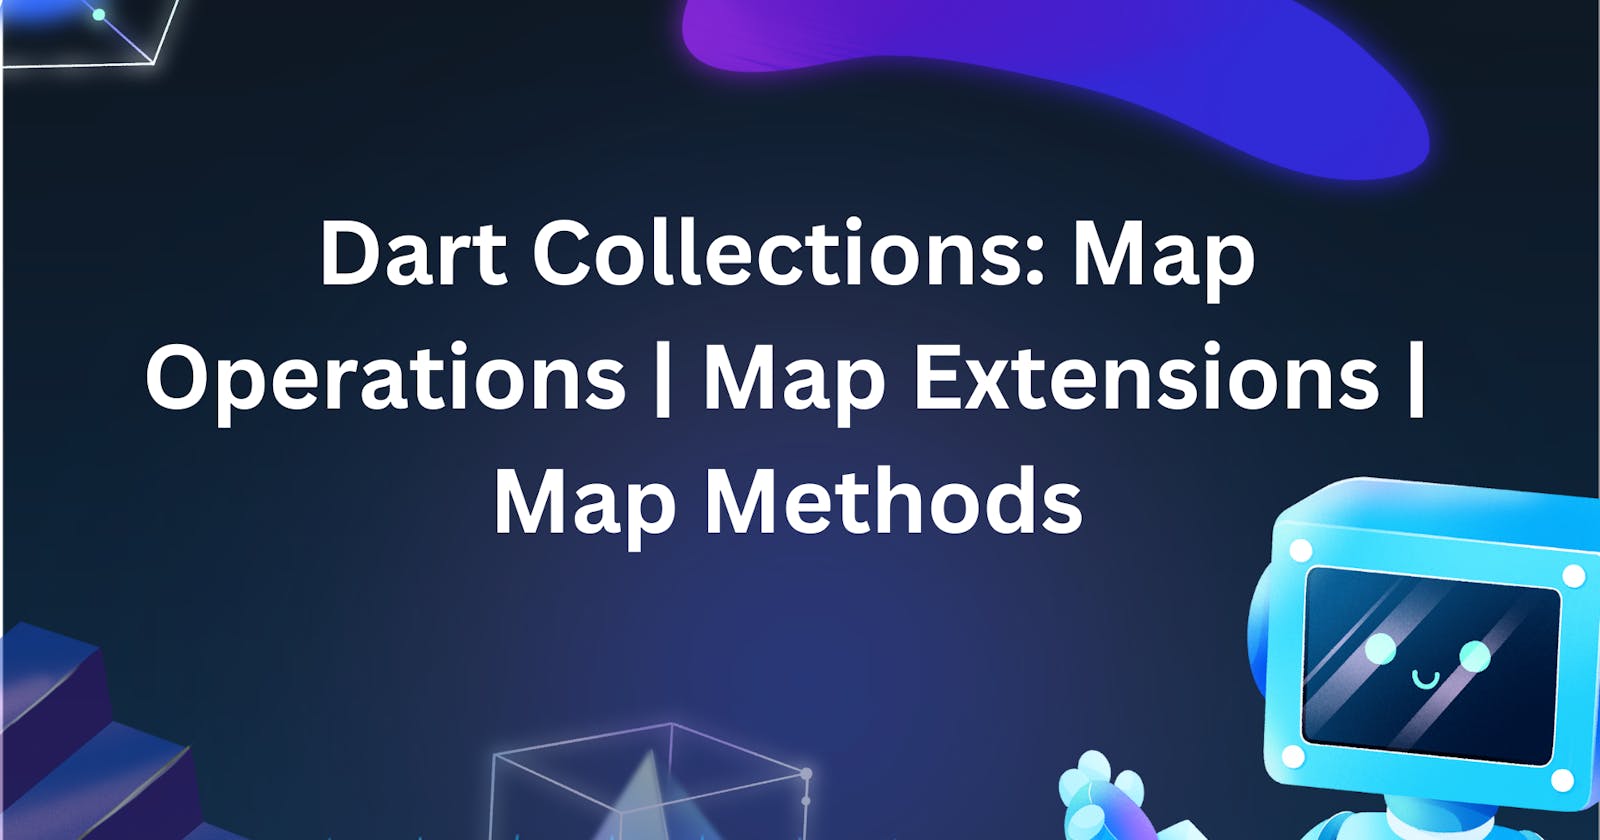 Dart Collections: Map Operations | Map Extensions | Map Methods